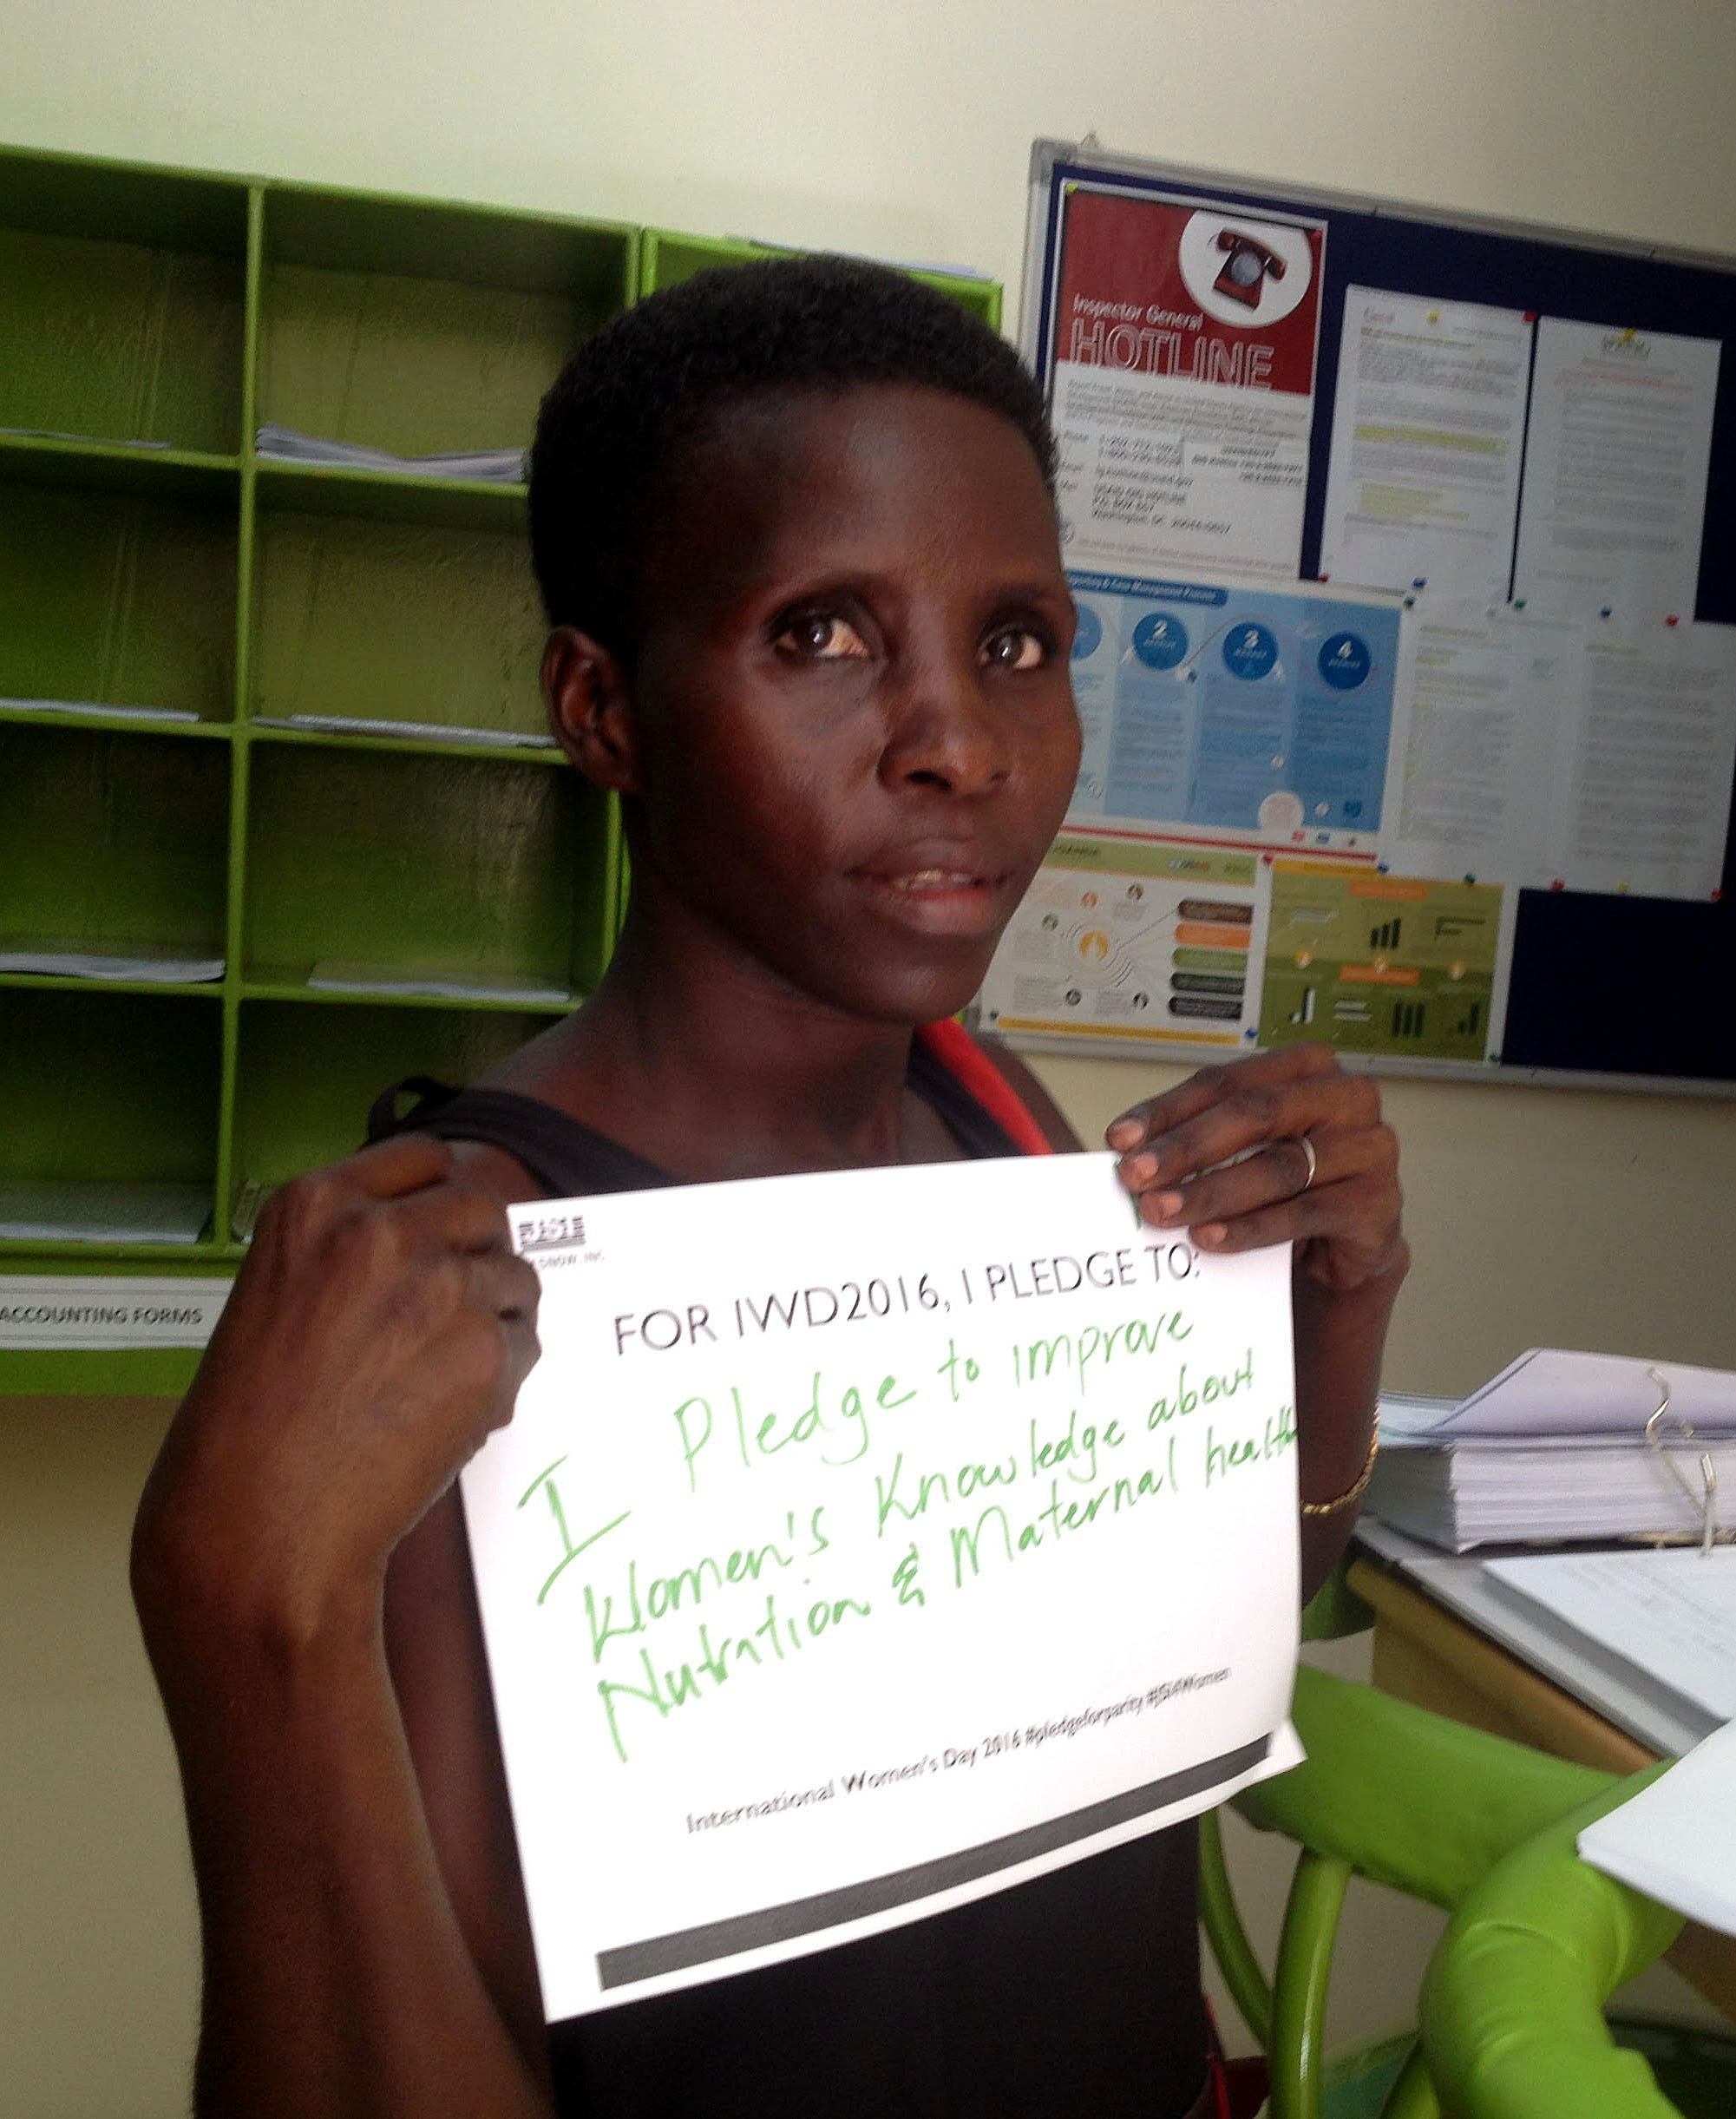 "For IWD ’16, I pledge to improve women’s knowledge about nutrition and maternal health"